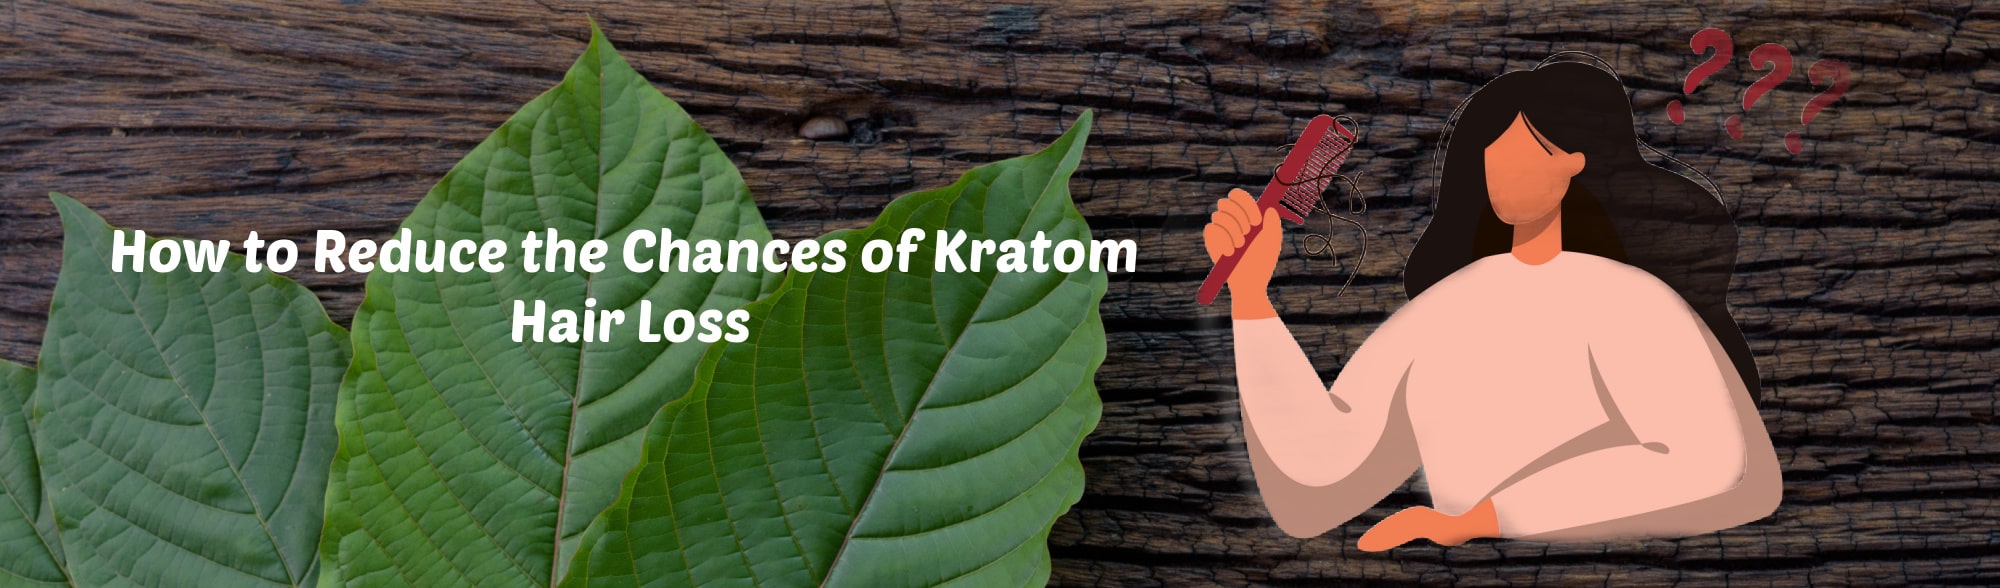 image of how to reduce chances of kratom hair loss